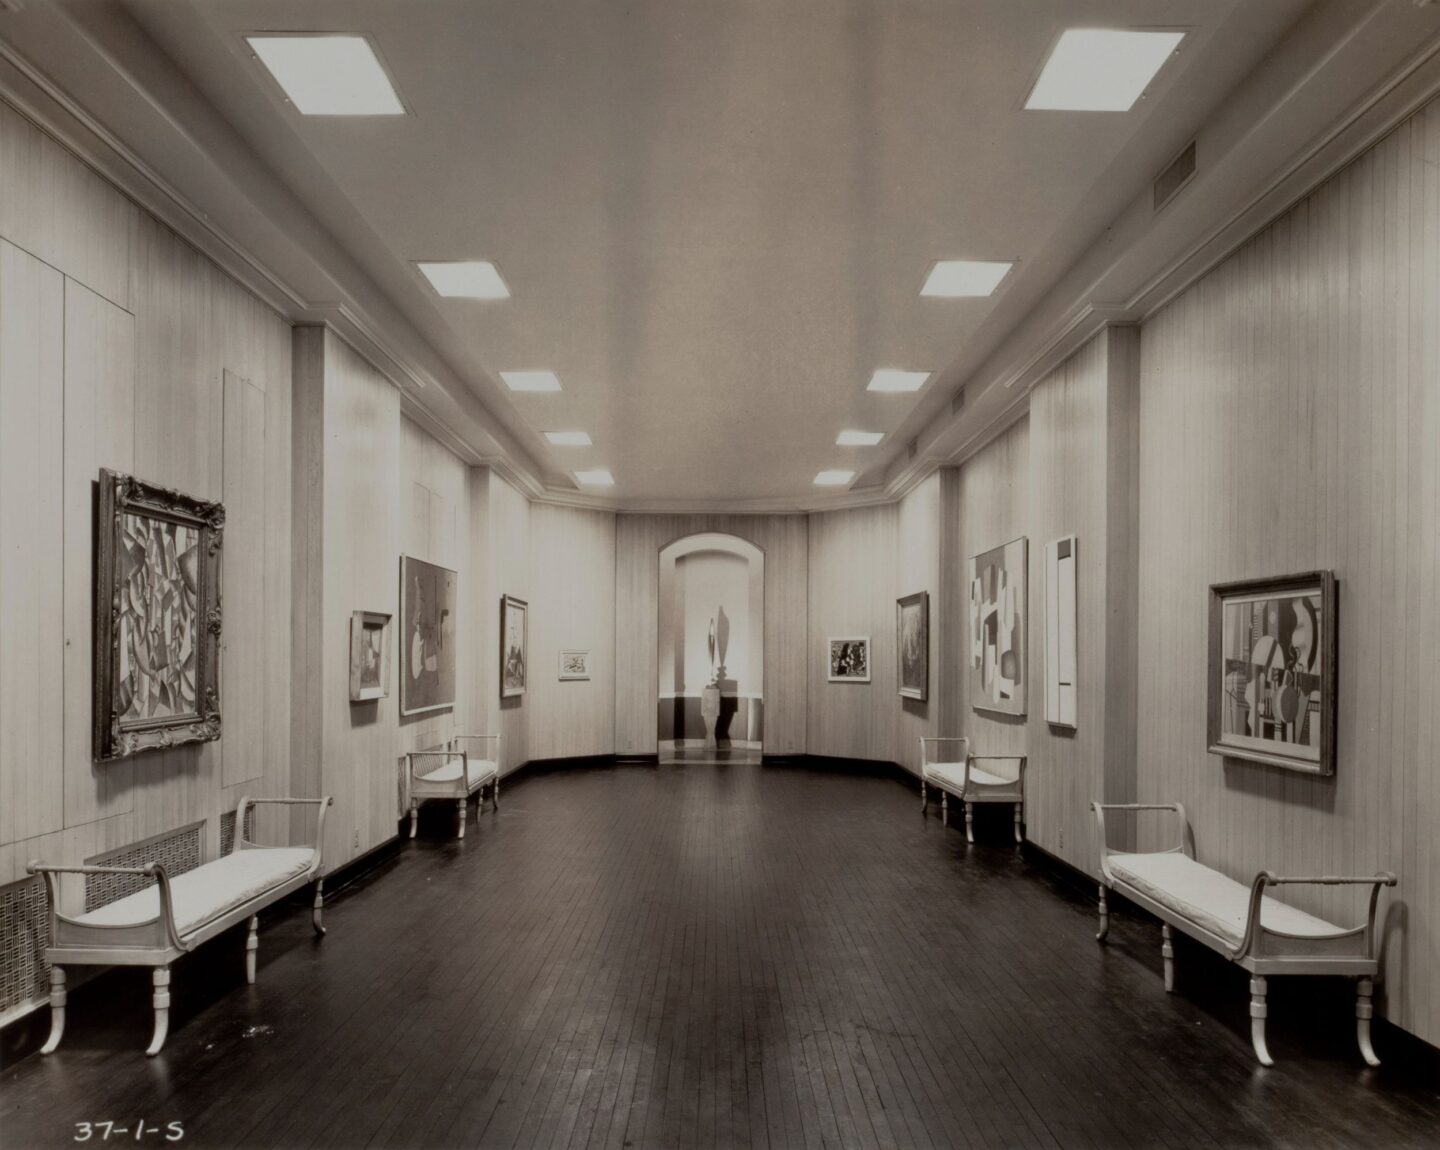 A large gallery interior. The left and right gallery walls are lined with five modernist paintings on each side. In the center and to the back of the gallery is an abstract golden sculpture of a bird.